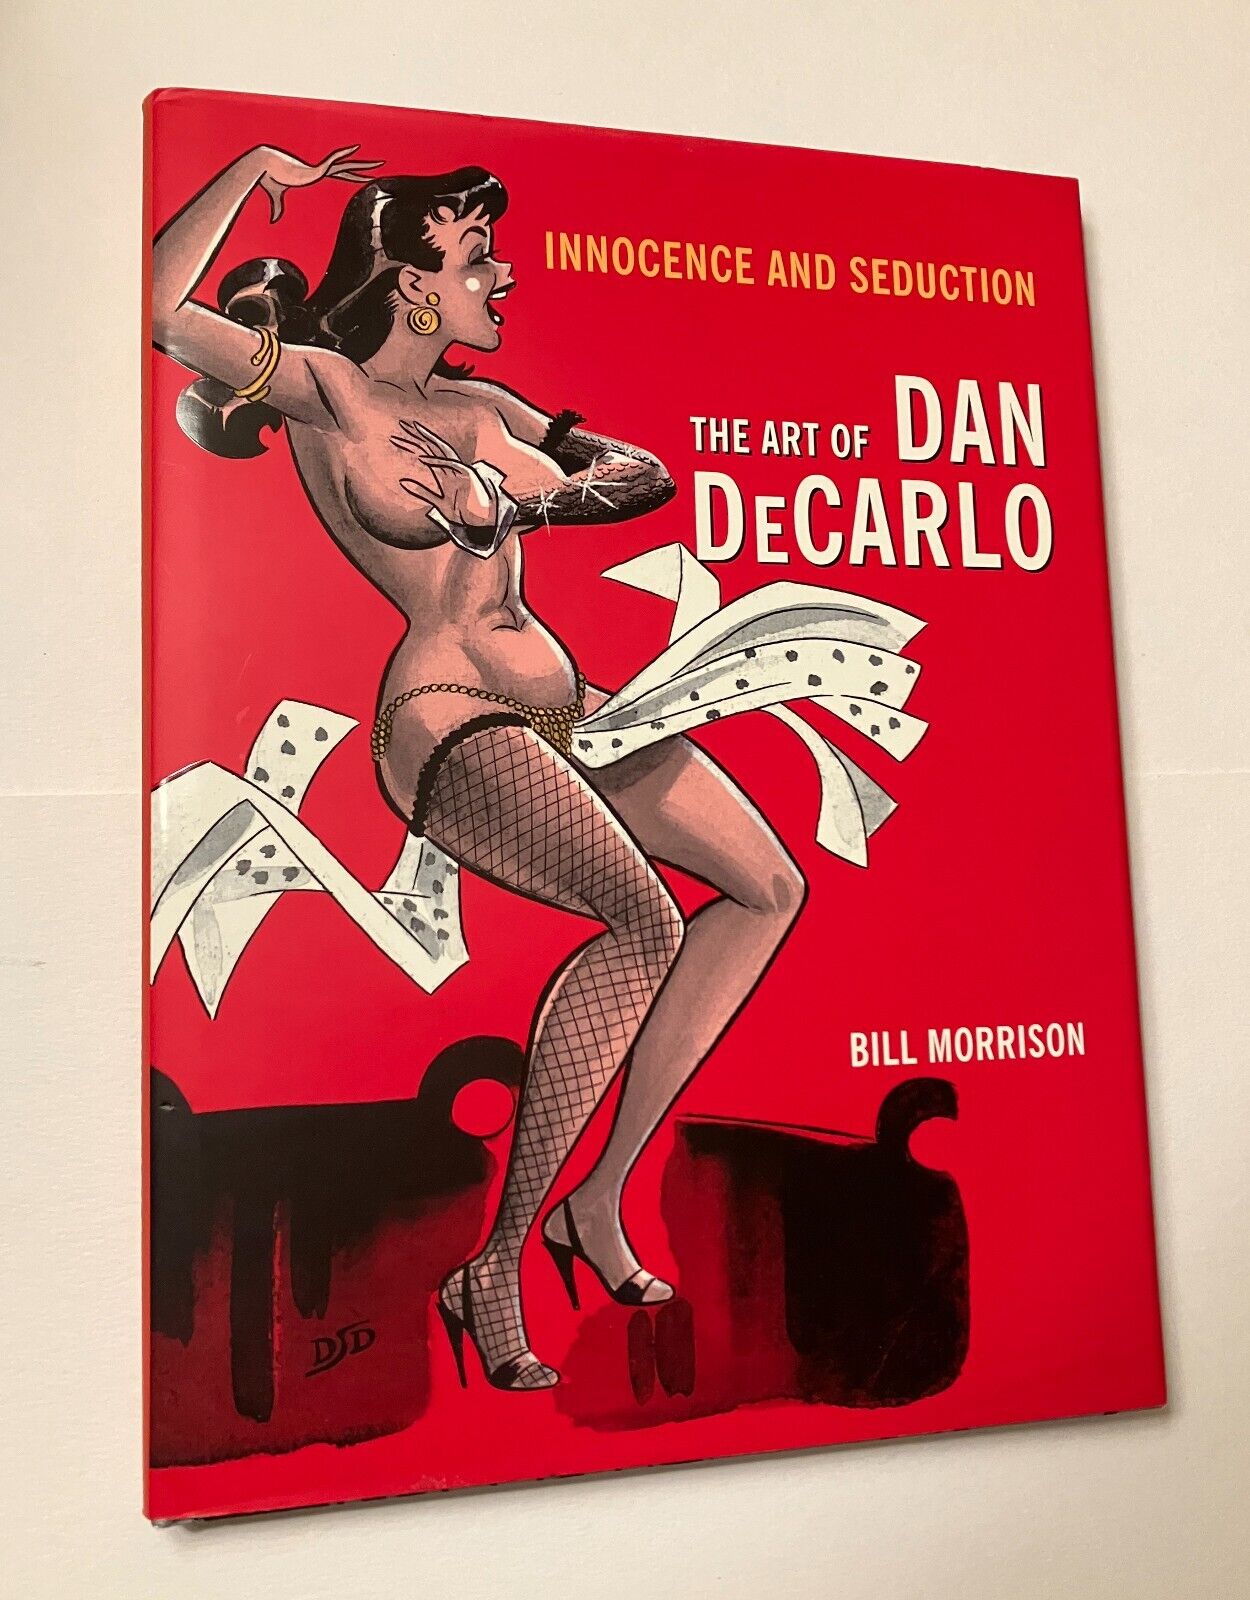 Innocence and Seduction: The Art of Dan DeCarlo Hardcover by Bill Morrison